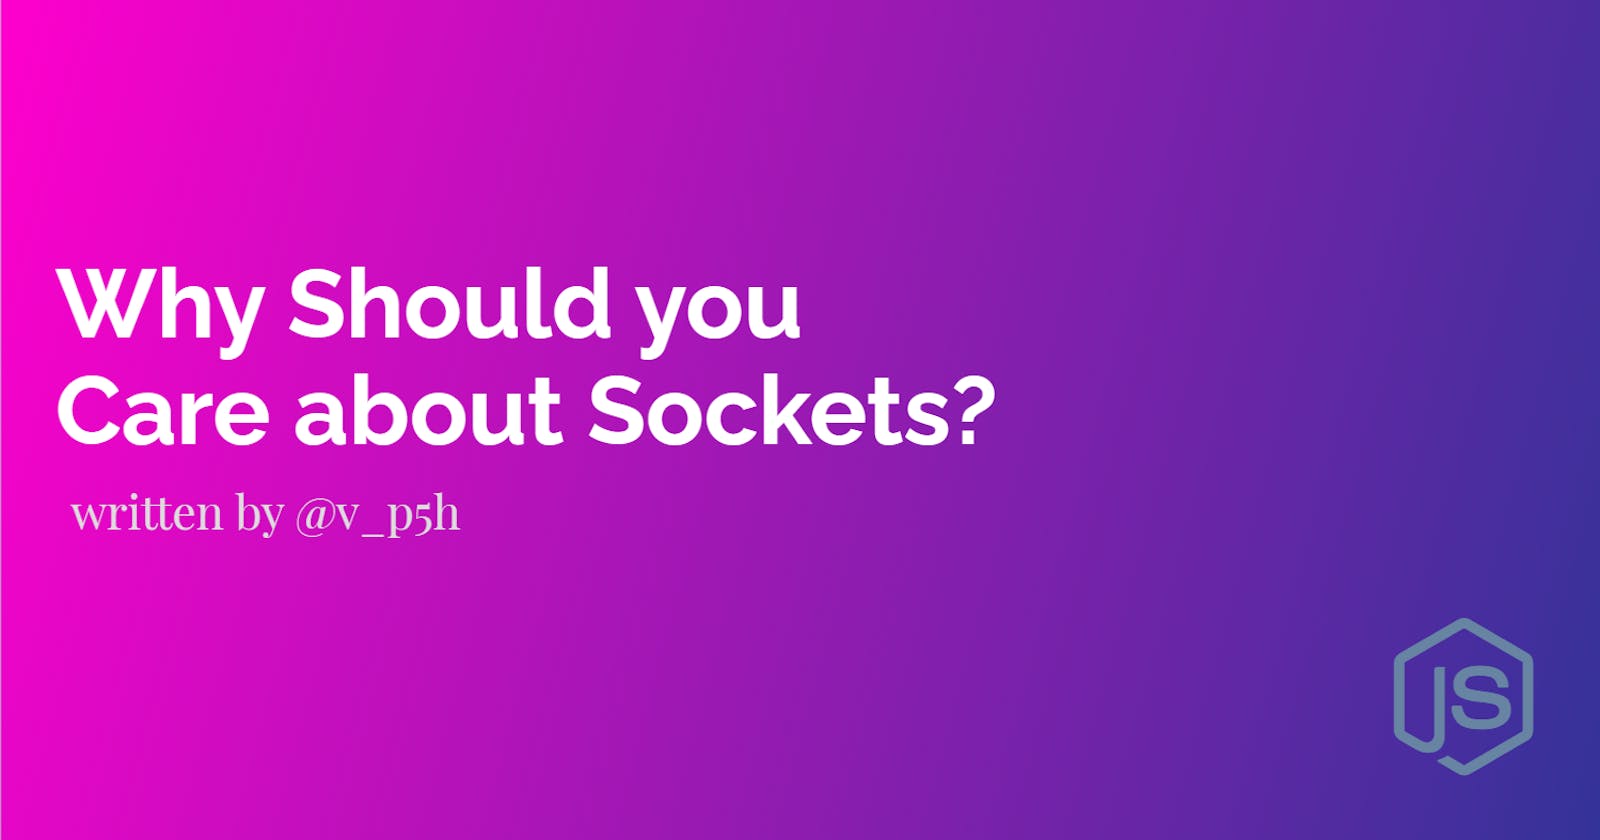 Why should you care About Sockets?